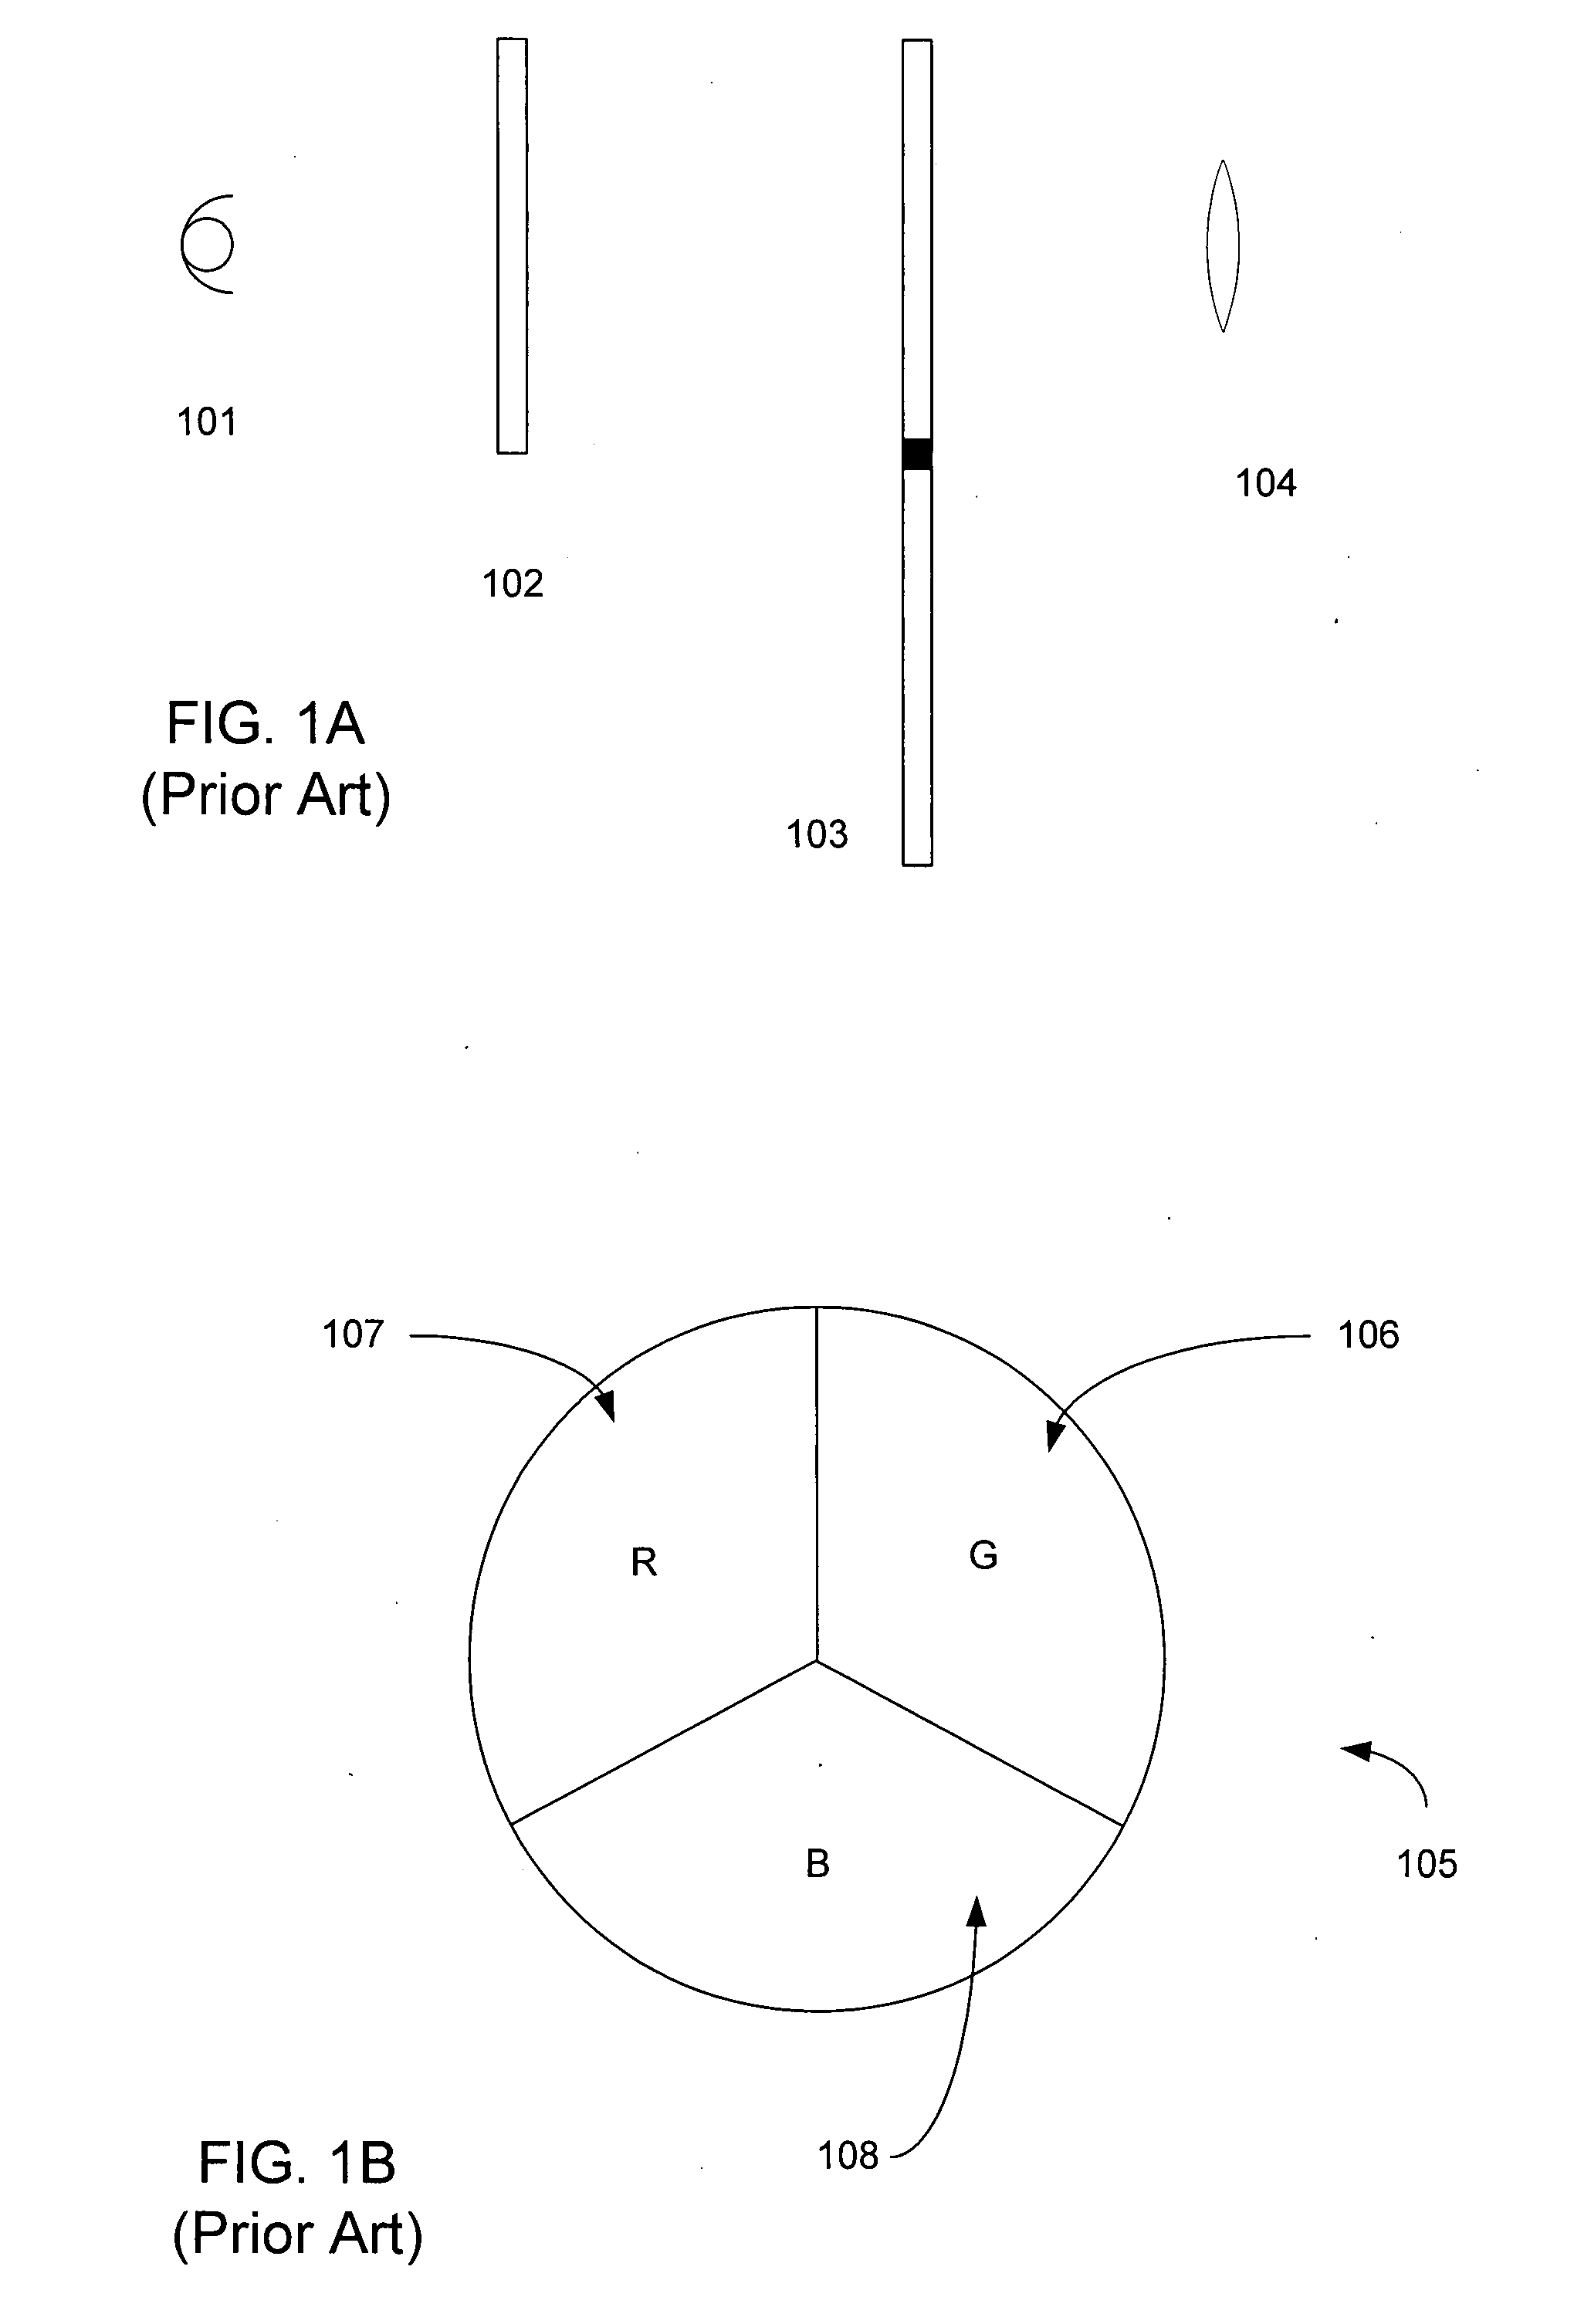 Optical concatenation for field sequential stereoscpoic displays